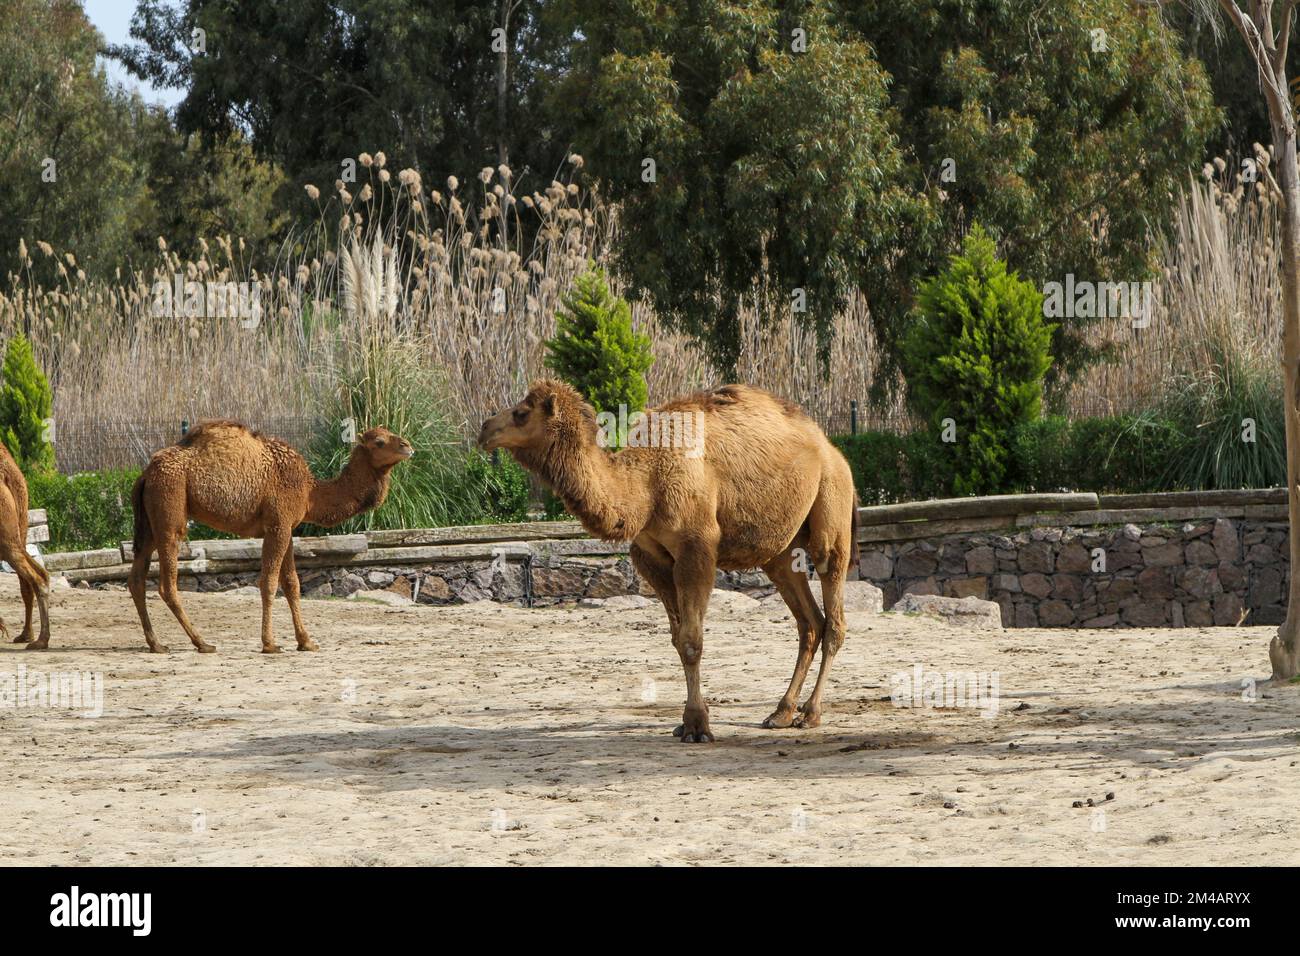 İzmir, Turkey - March 31 2013: many brown camels, in the zoo Stock Photo